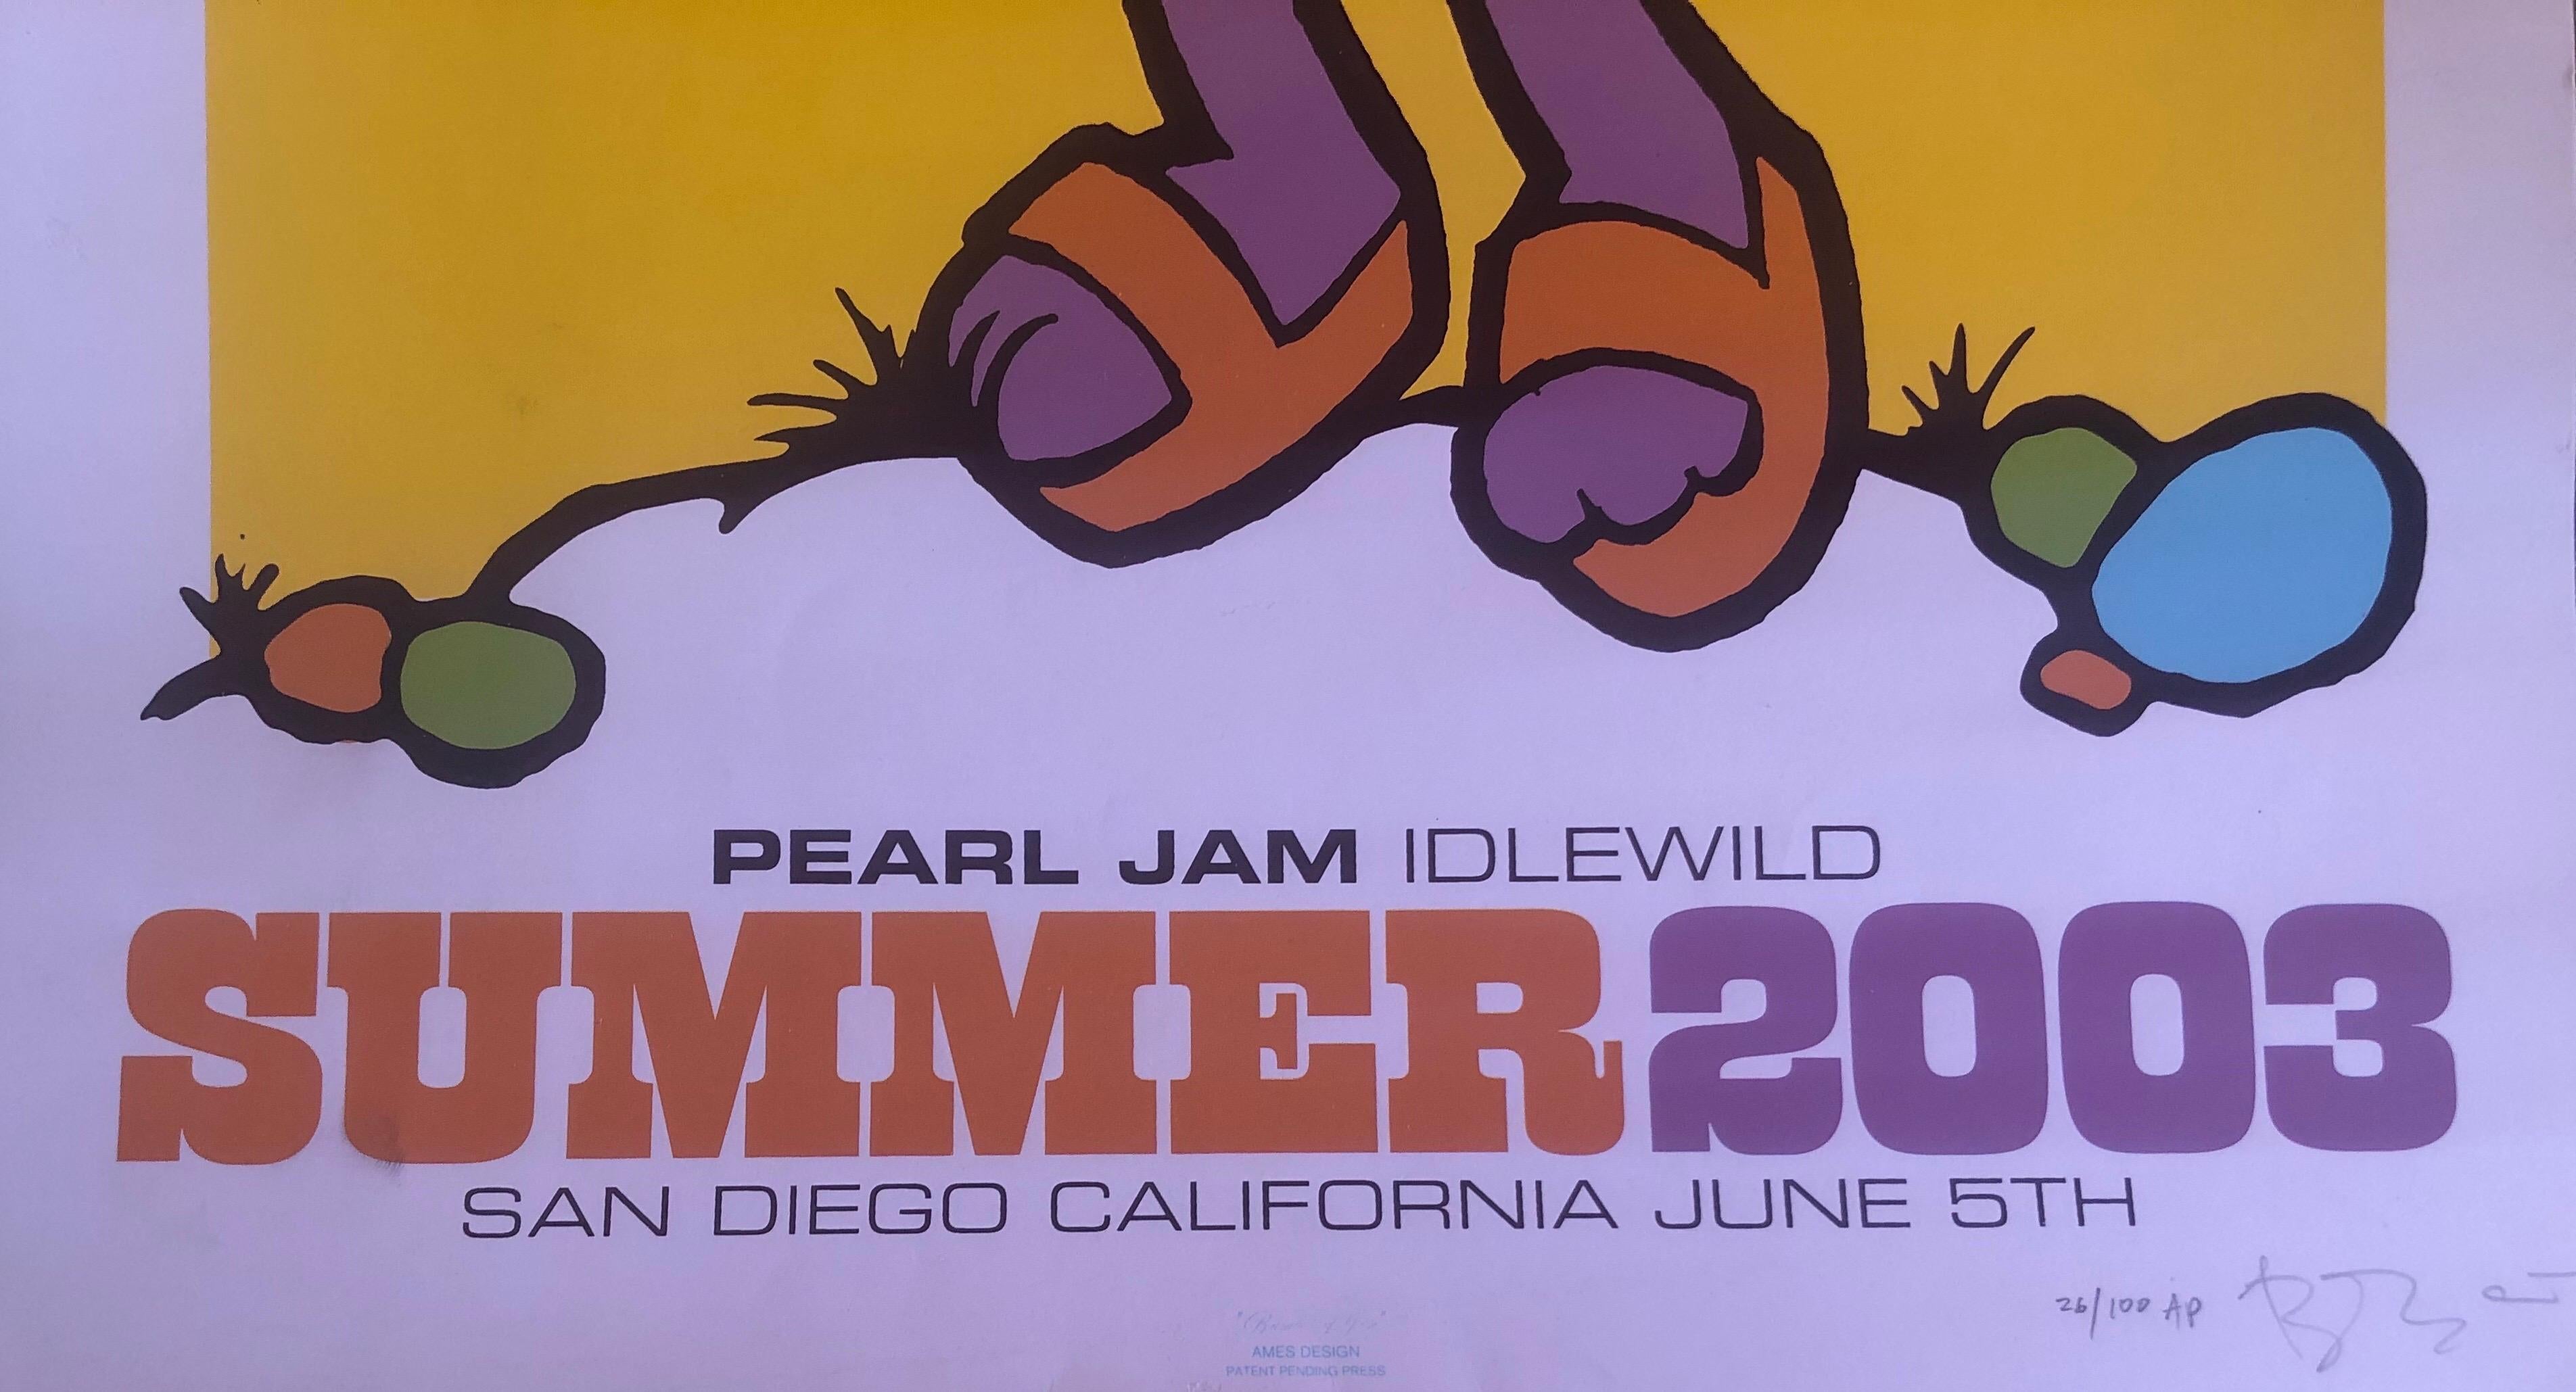 2003 Pearl Jam Concert Poster - Live San Diego, CA Signed by Artist For Sale 2